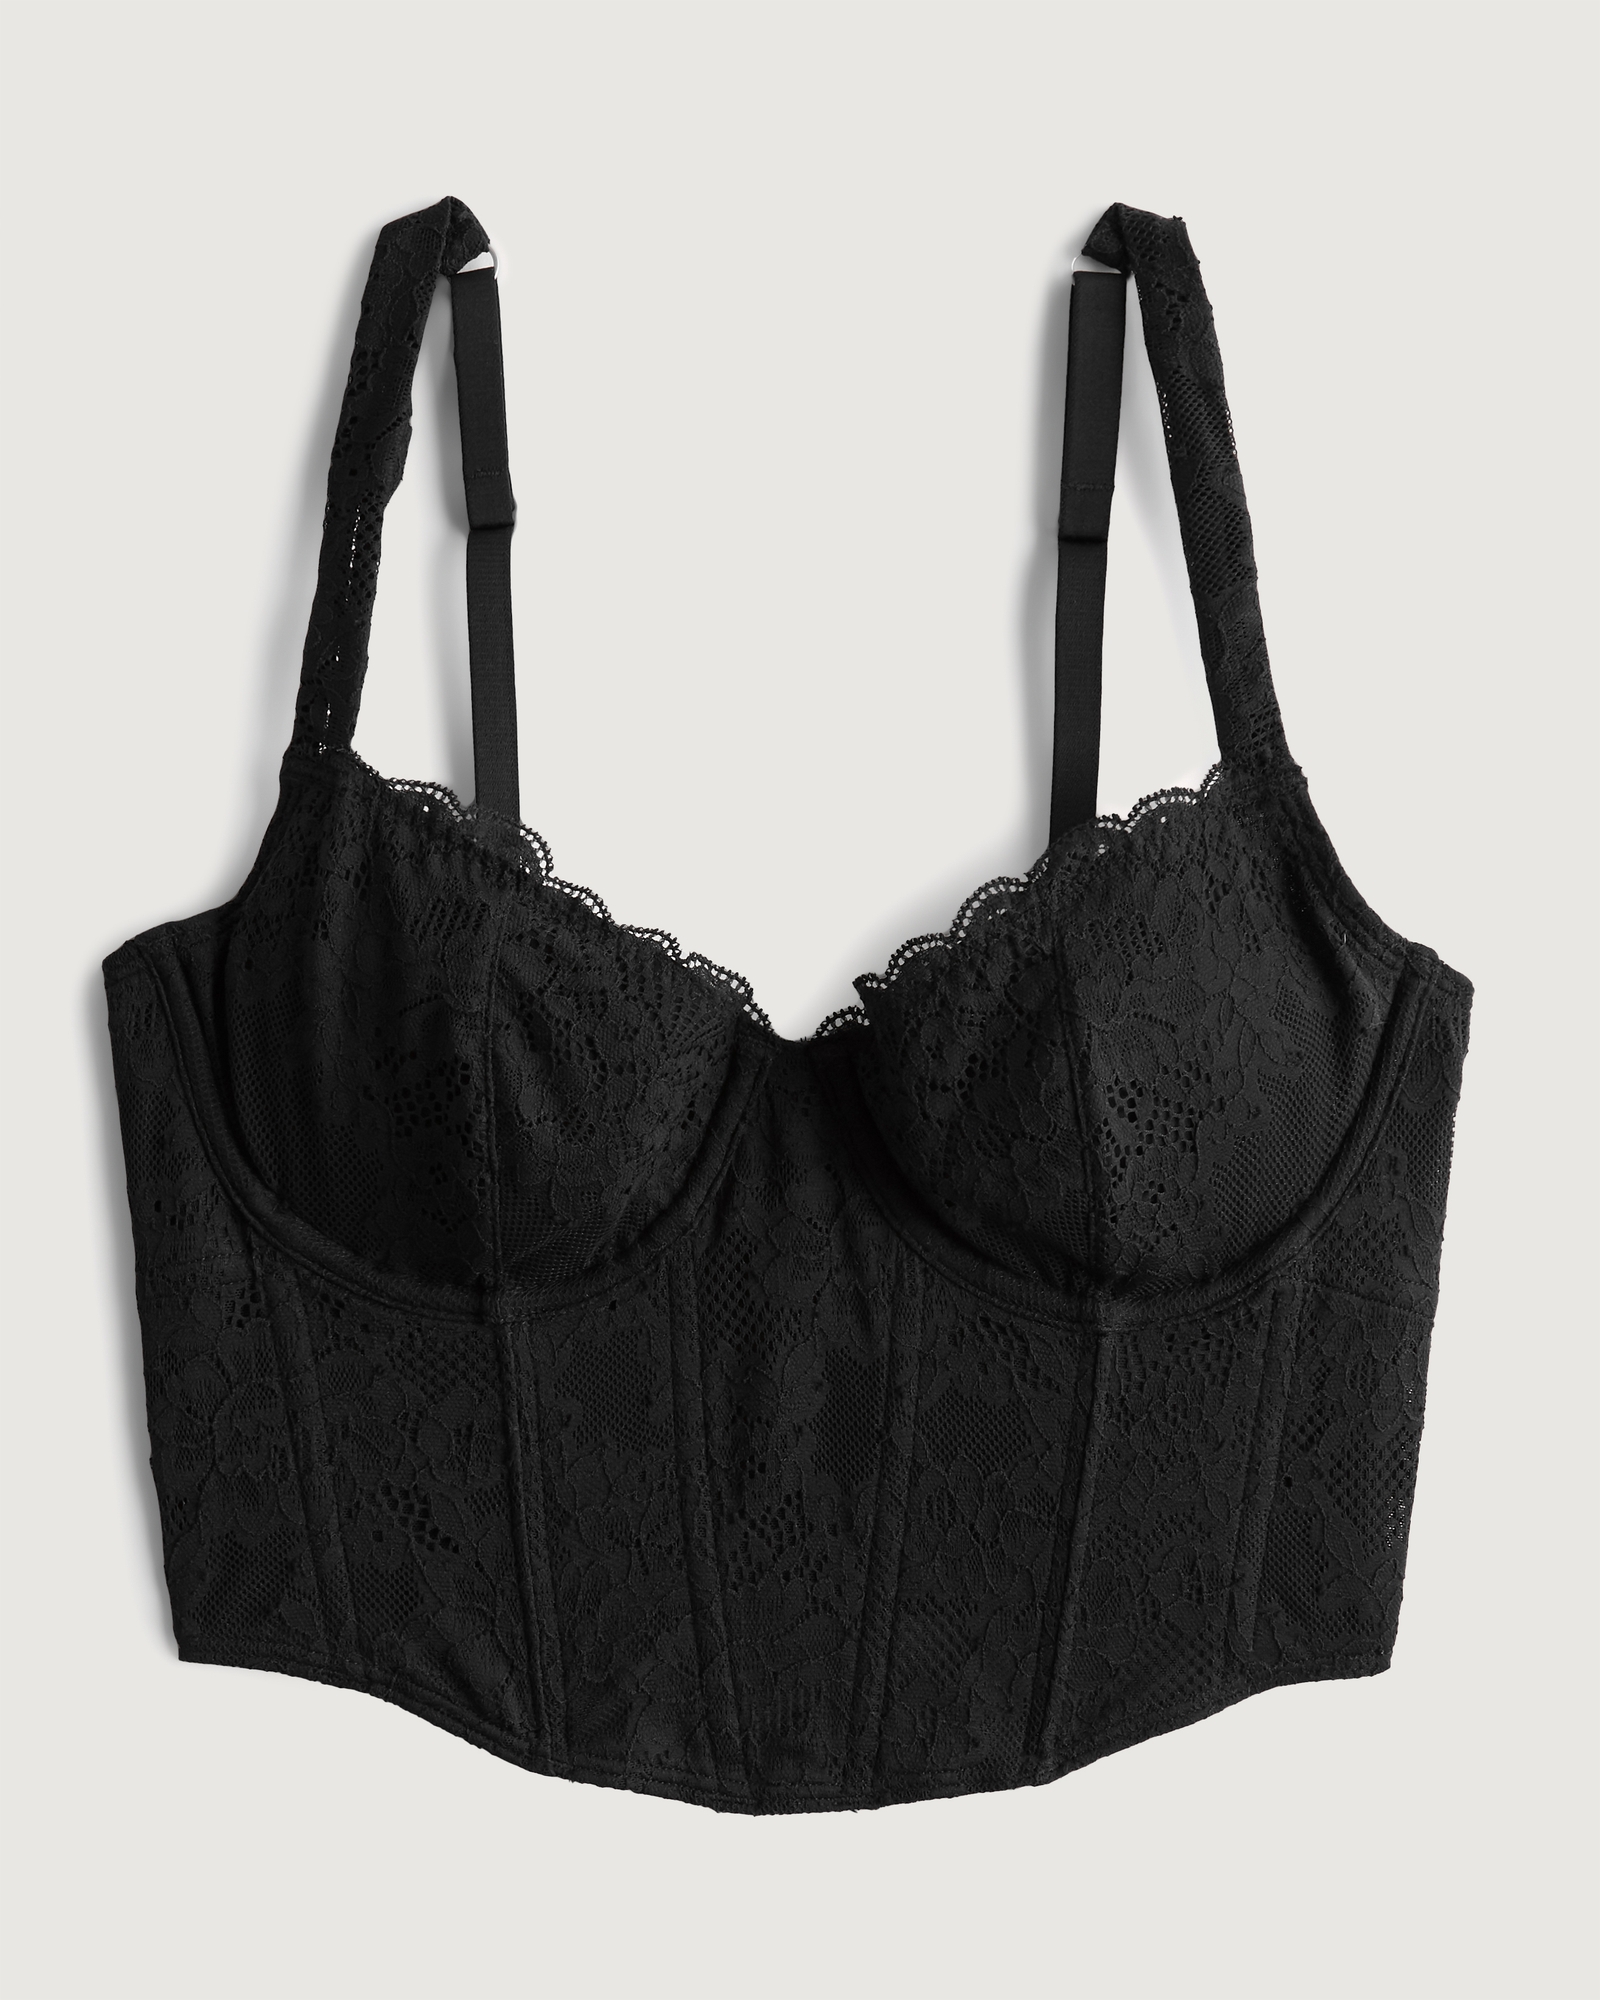 Gilly Hicks Bralette Black - $10 - From Shay